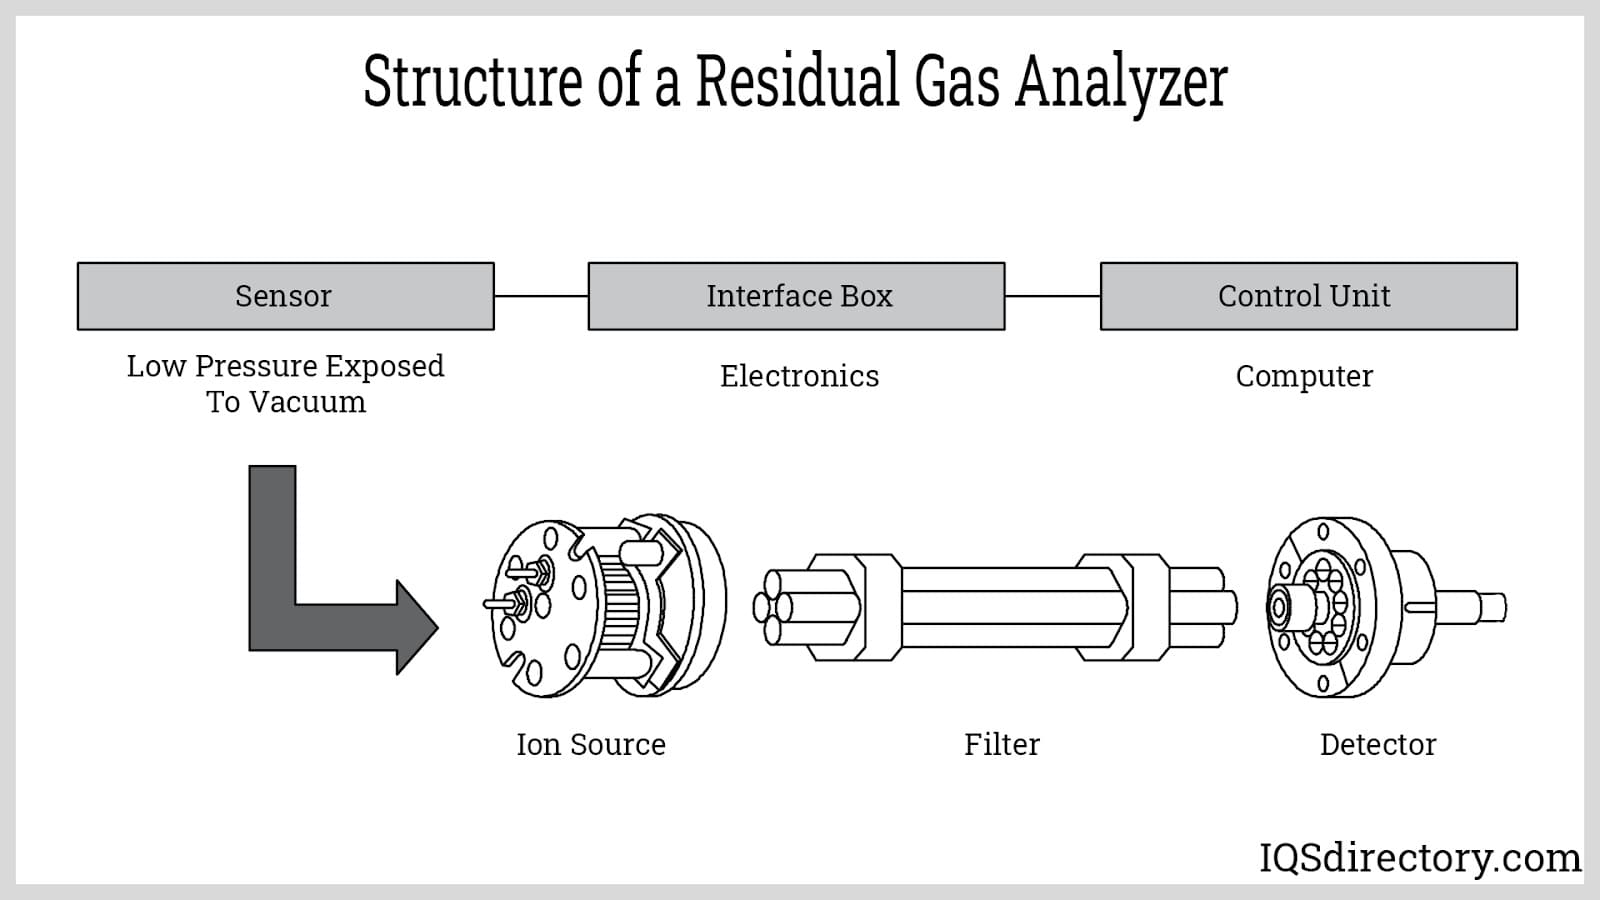 Structure of a Residual Gas Analyzer